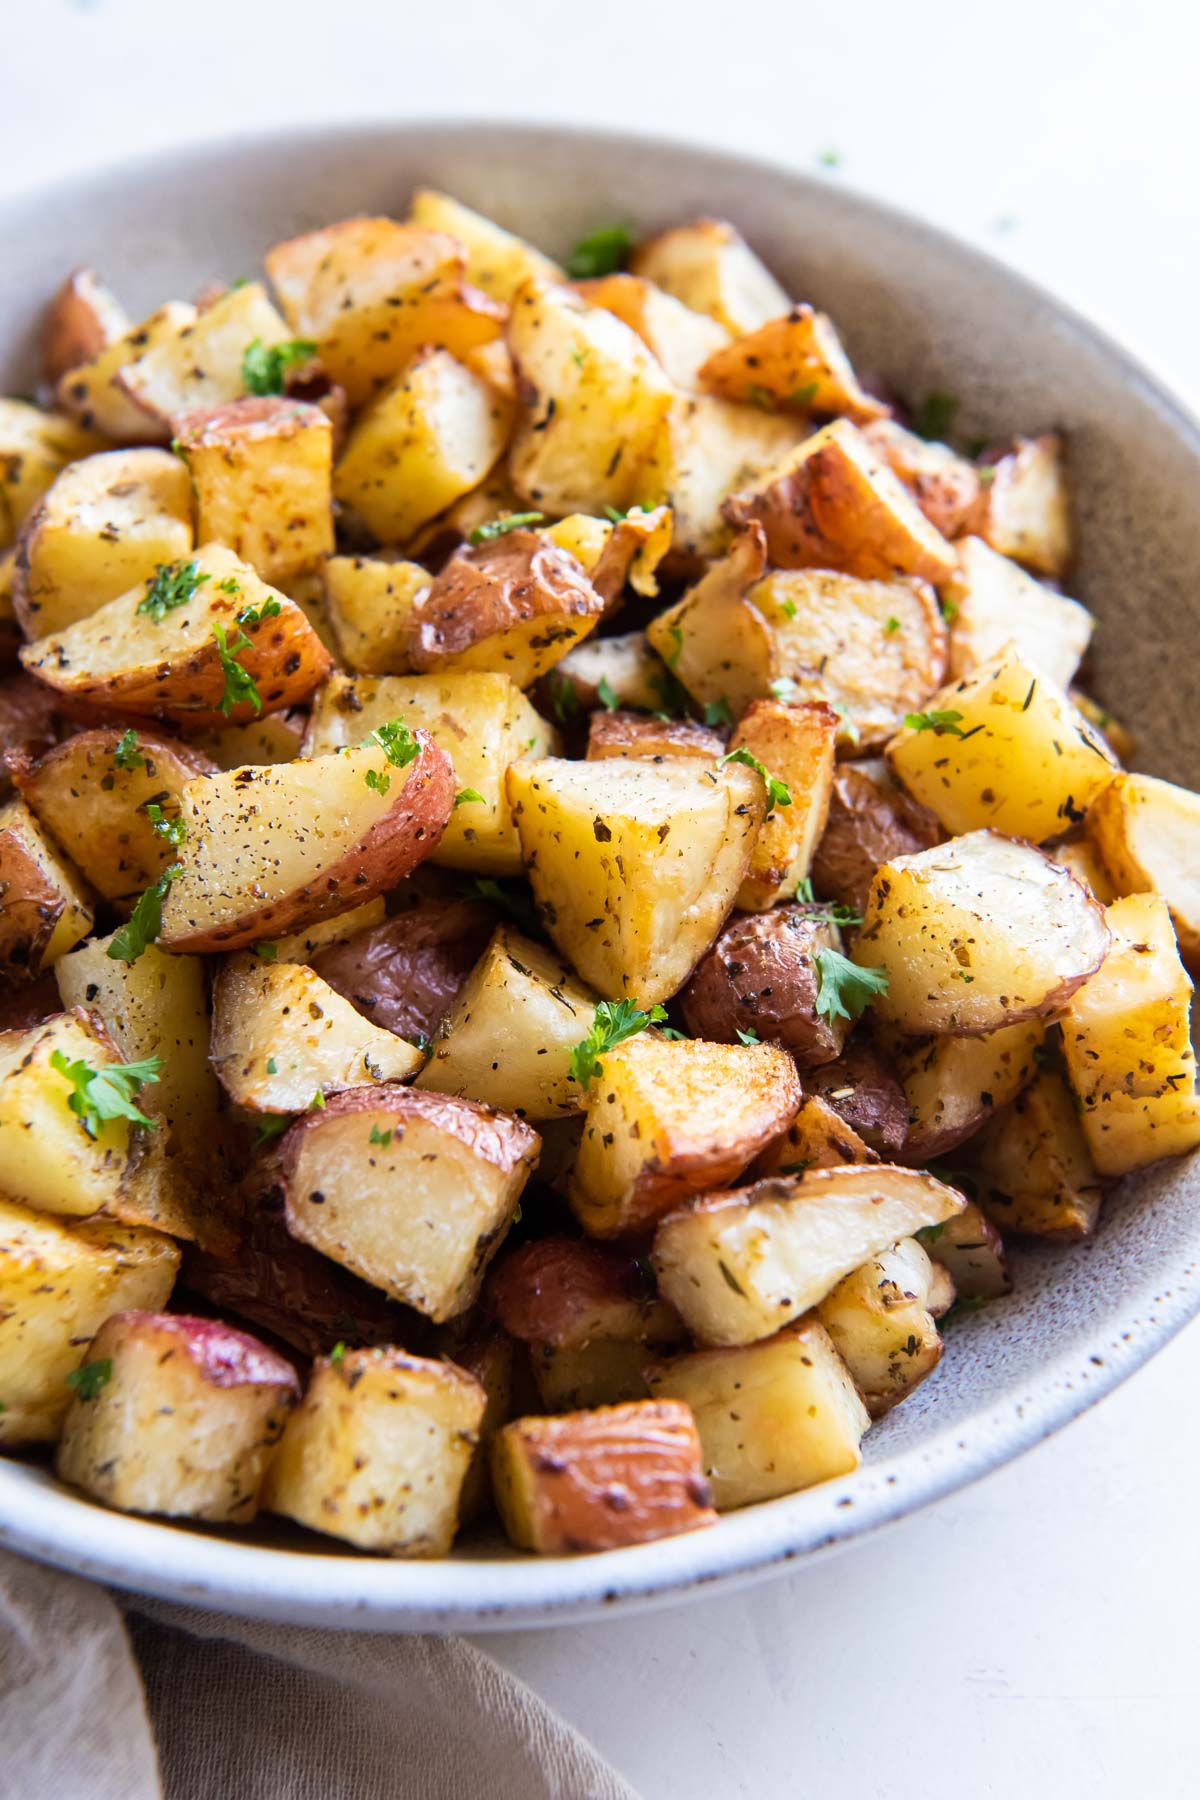 Roasted red potatoes in a serving bowl with parsley garnish.